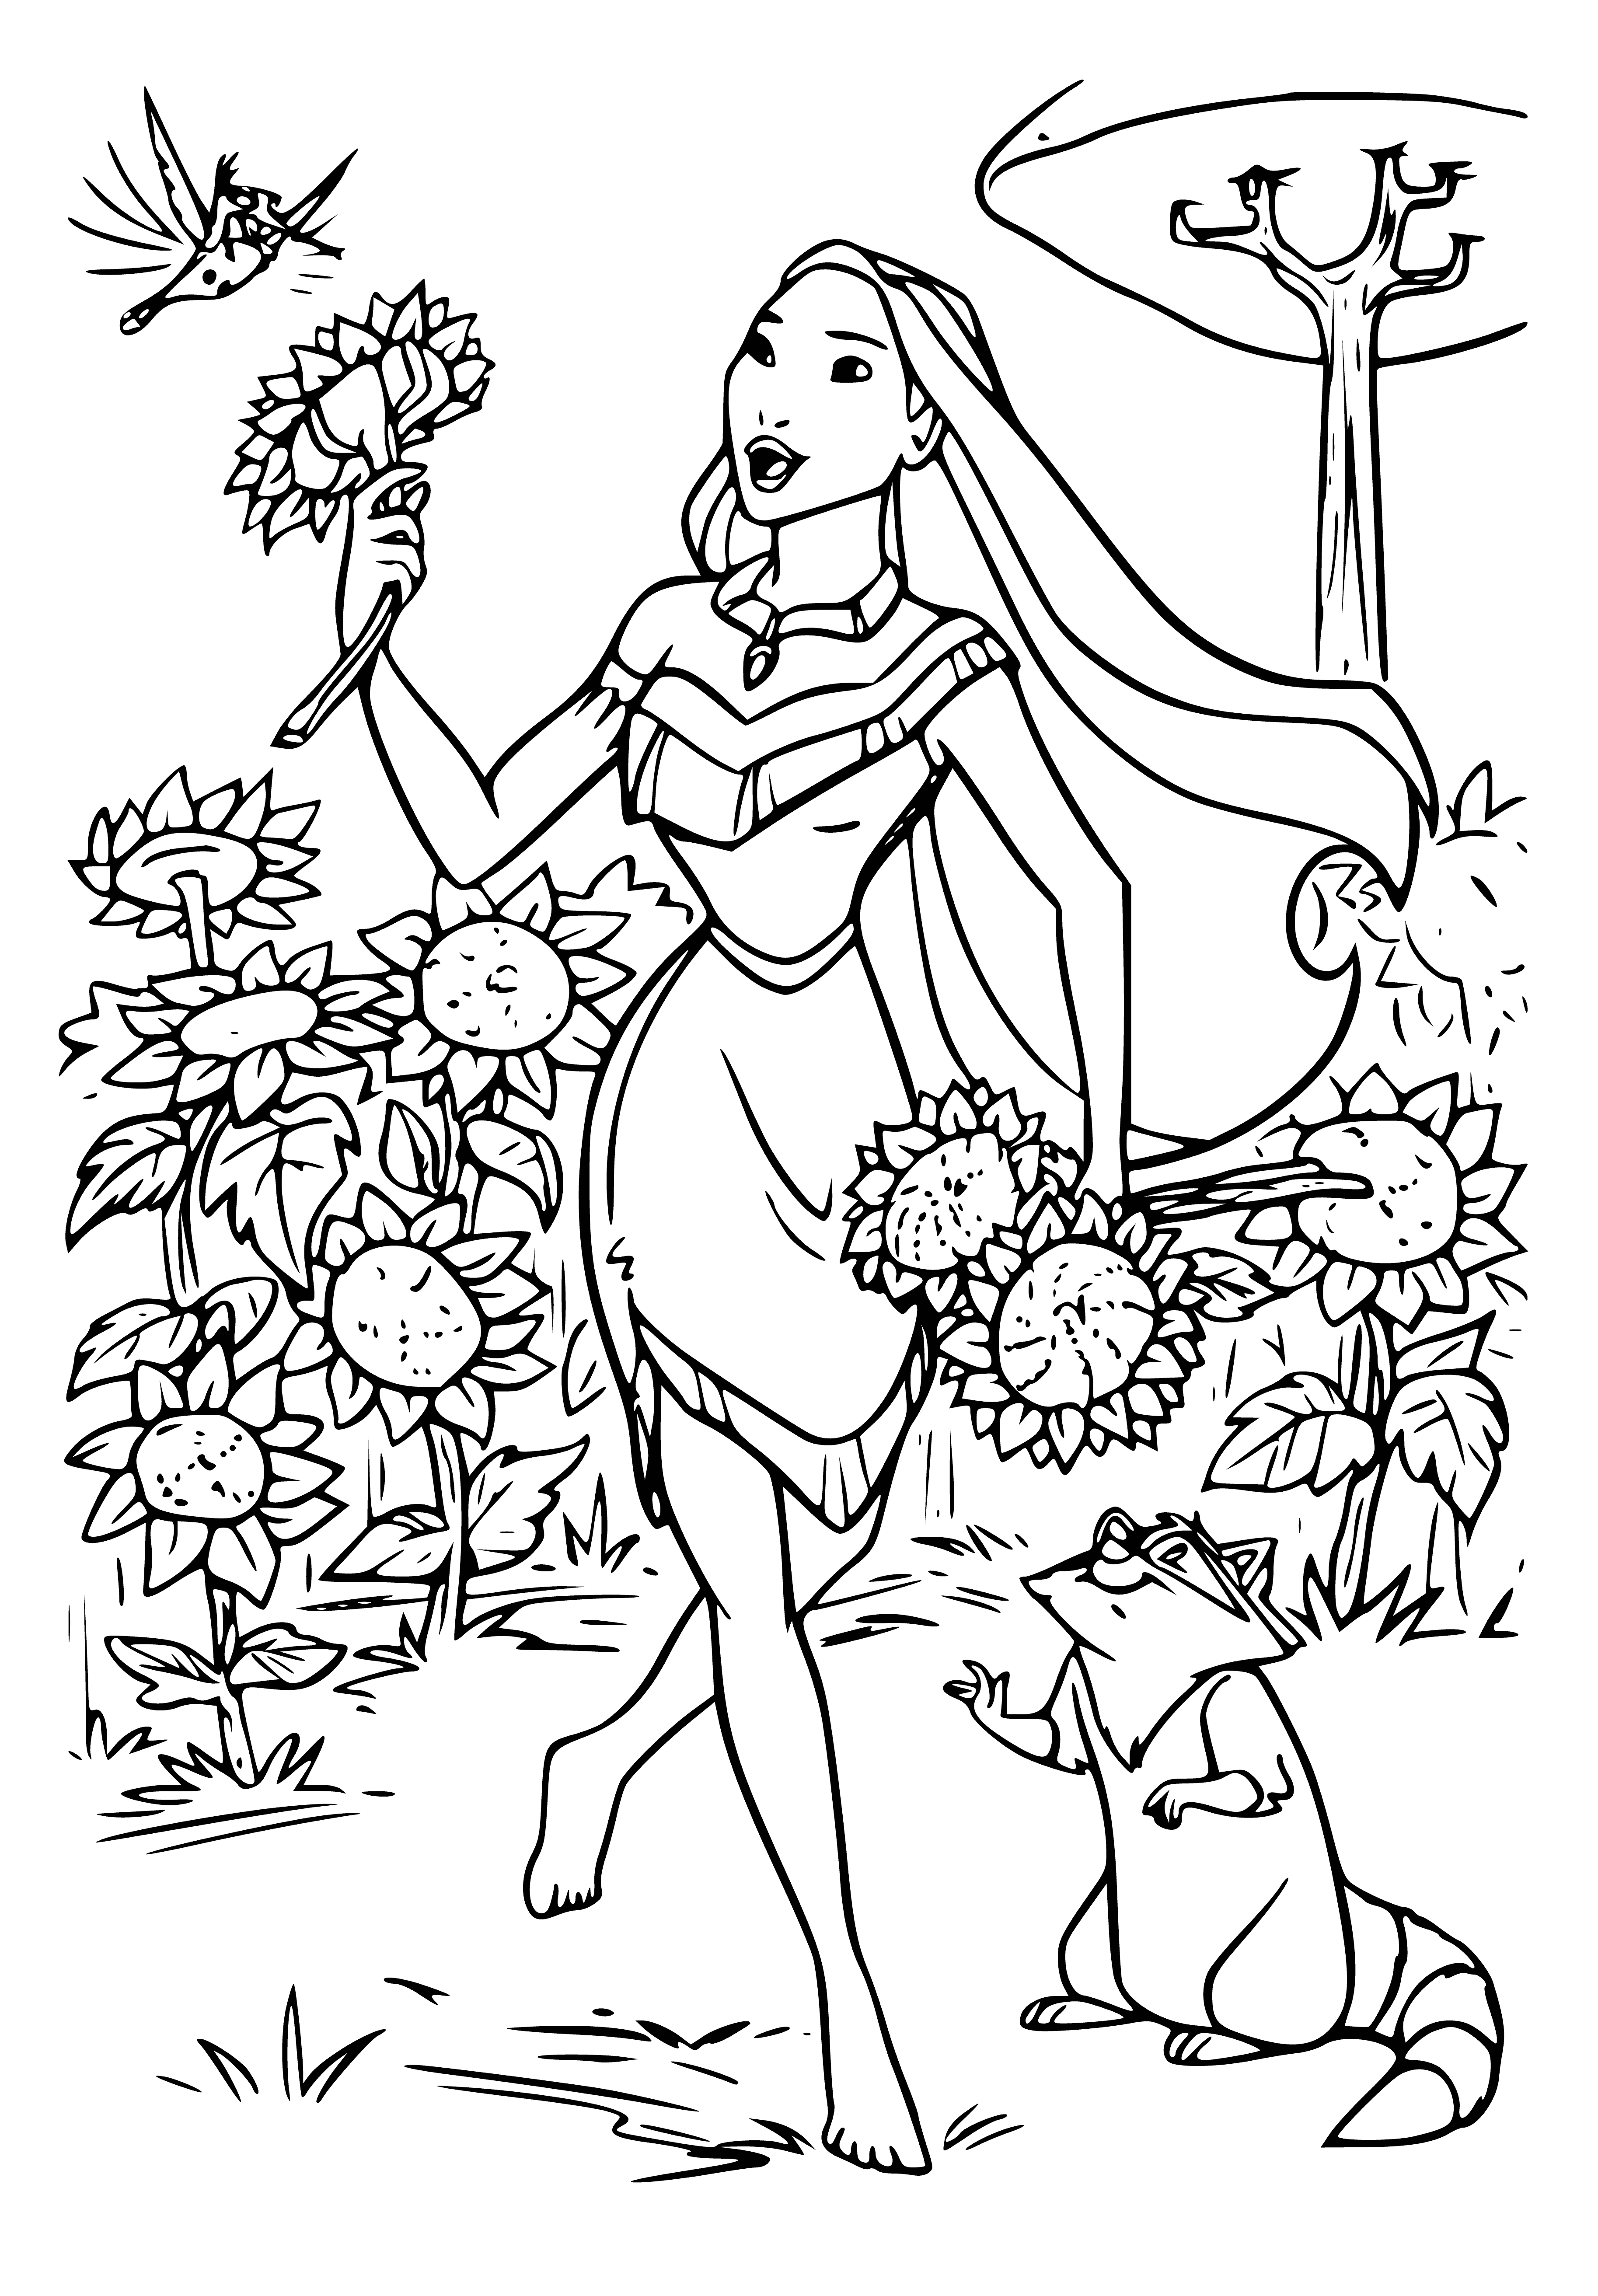 Friends of Pocahontas coloring page